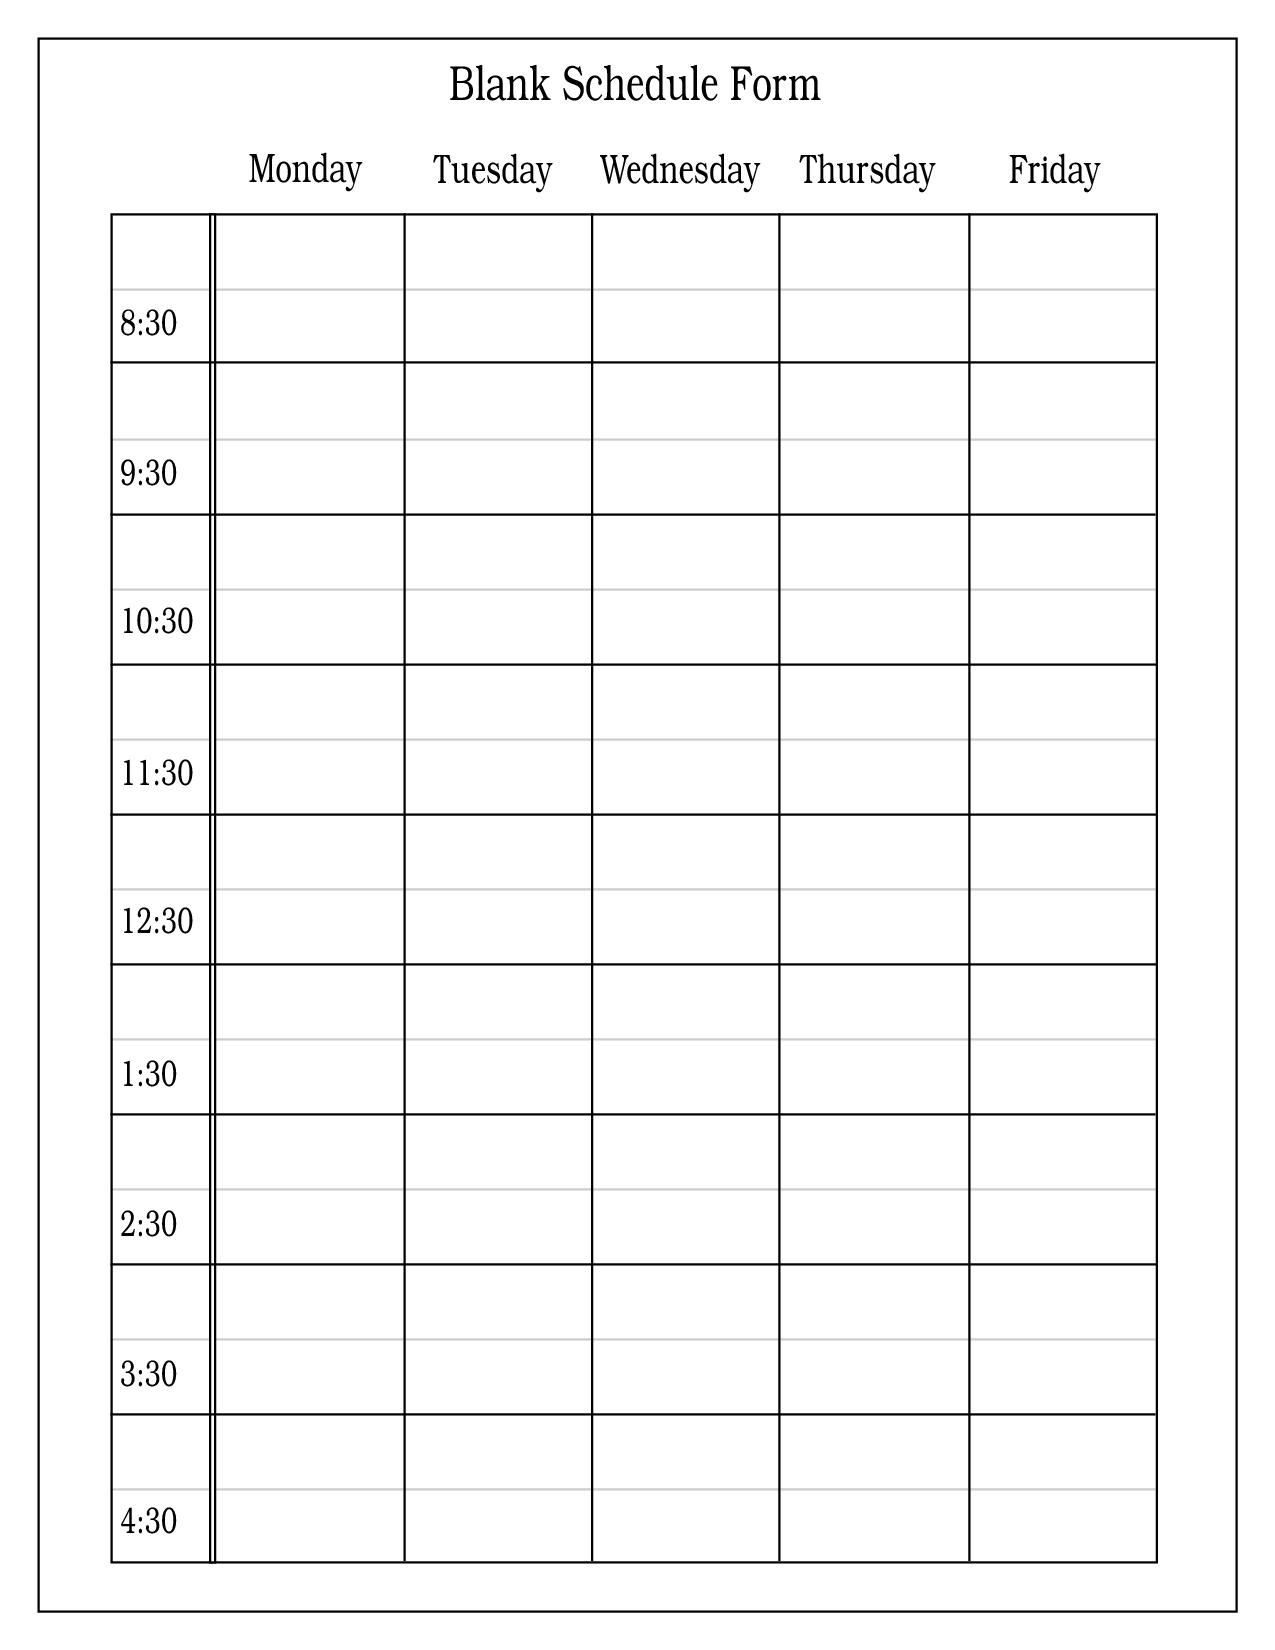 Employee Scheduling - Download A Free Employee Schedule Template For throughout Blank 5 Day School Timetable